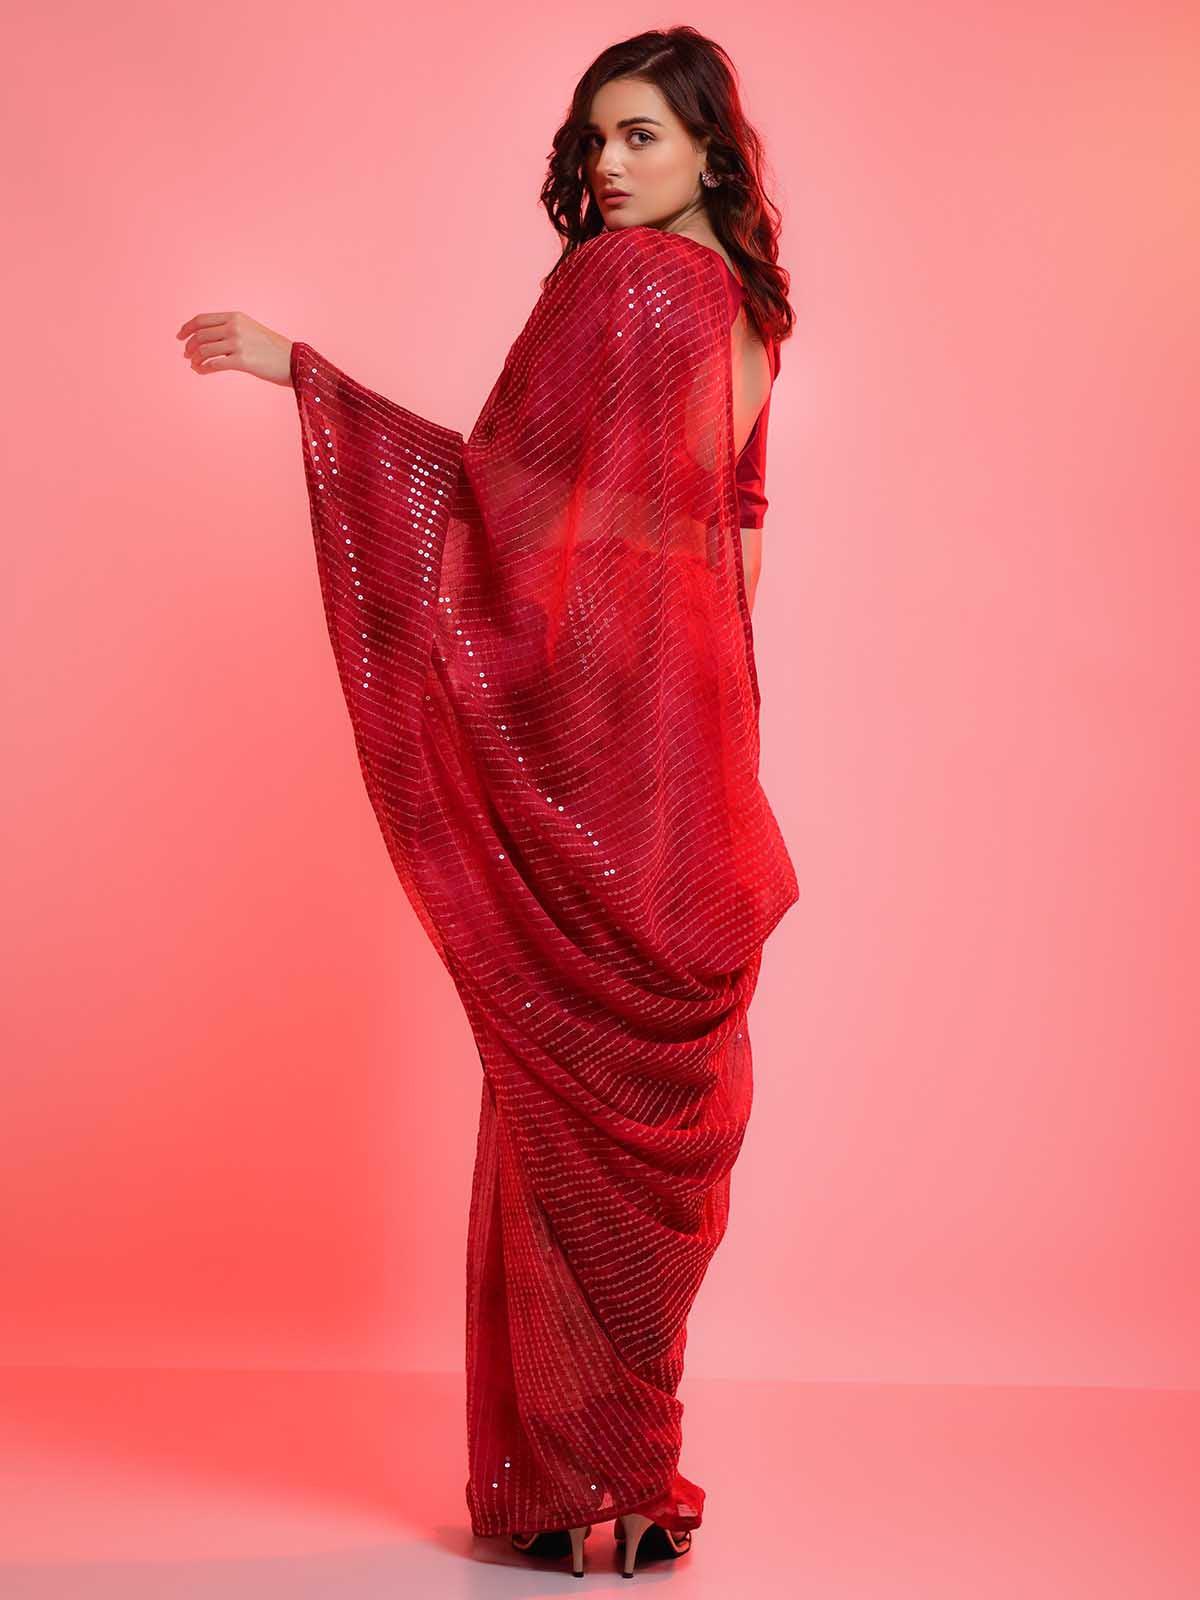 Women's Red Chiffon With Sequence Work Sequence Saree - Odette